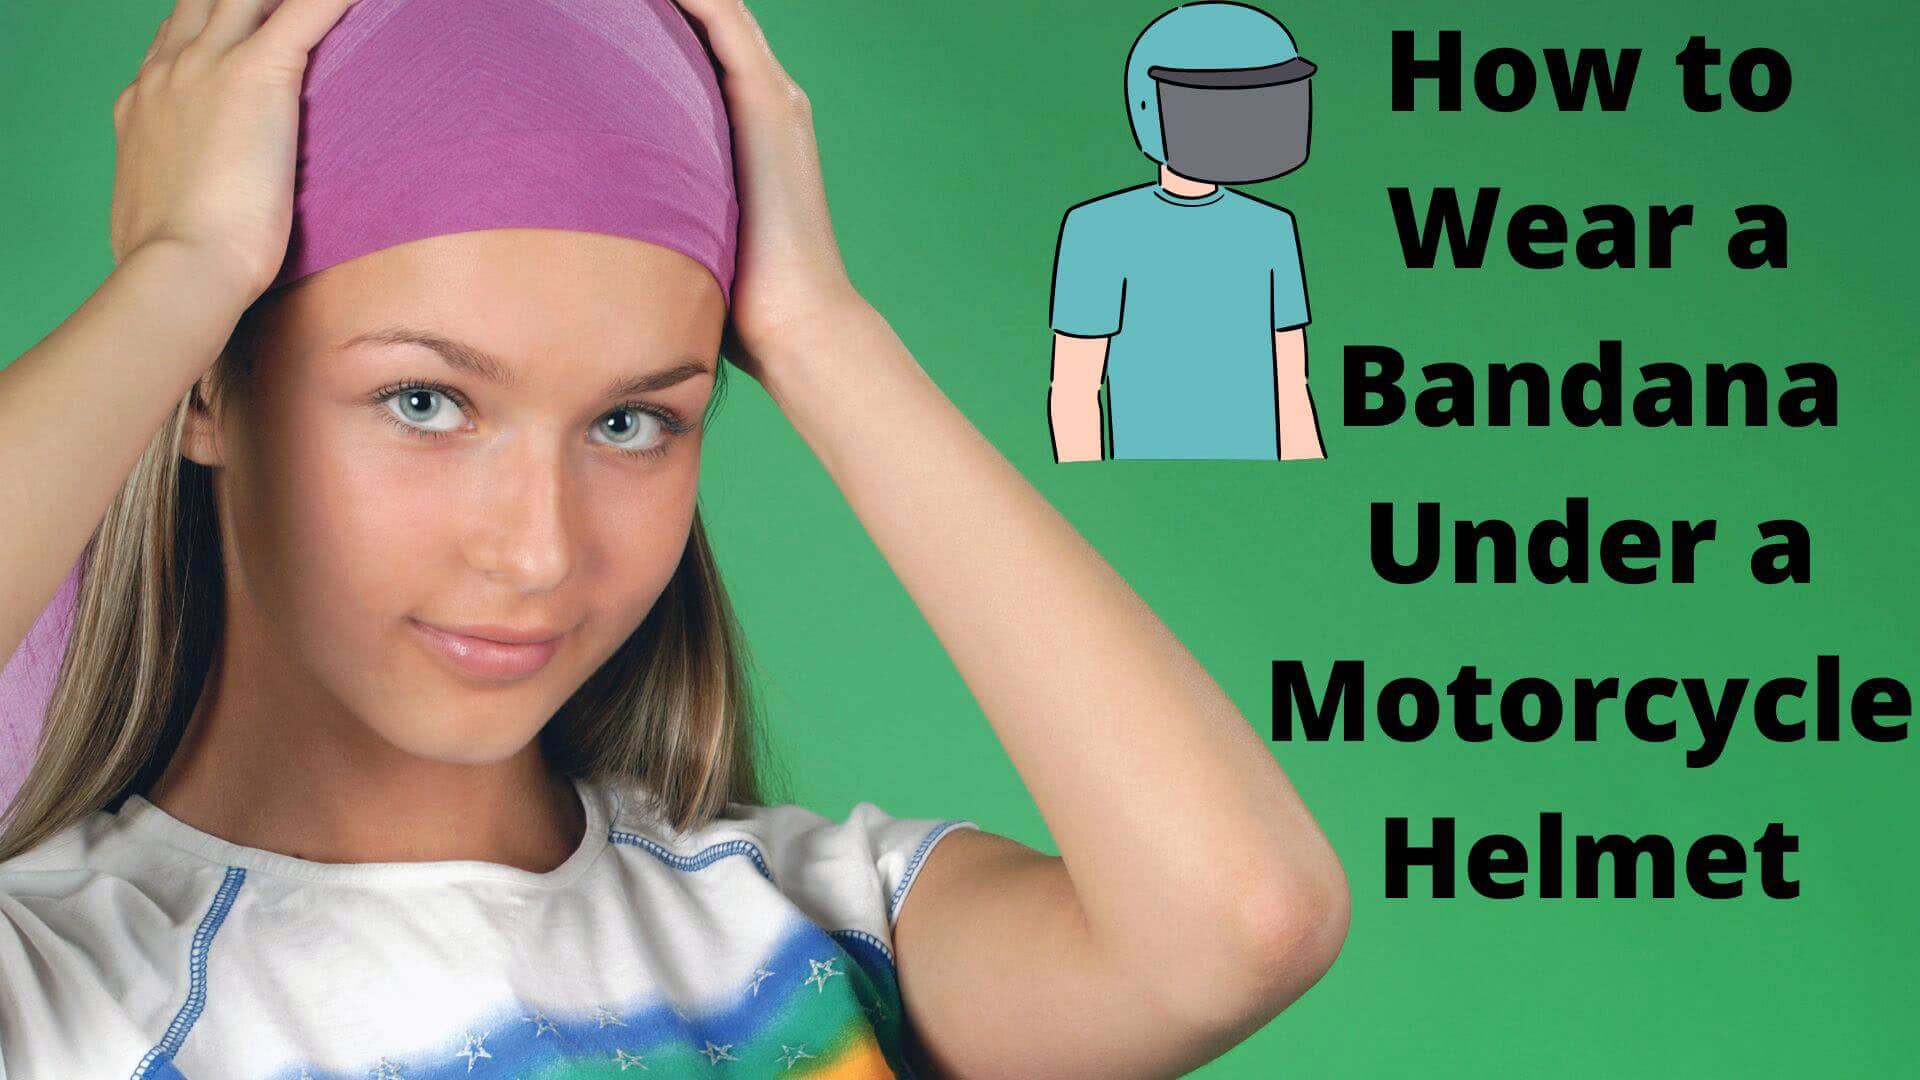 How to Wear a Bandana Under a Motorcycle Helmet For Safe Riding